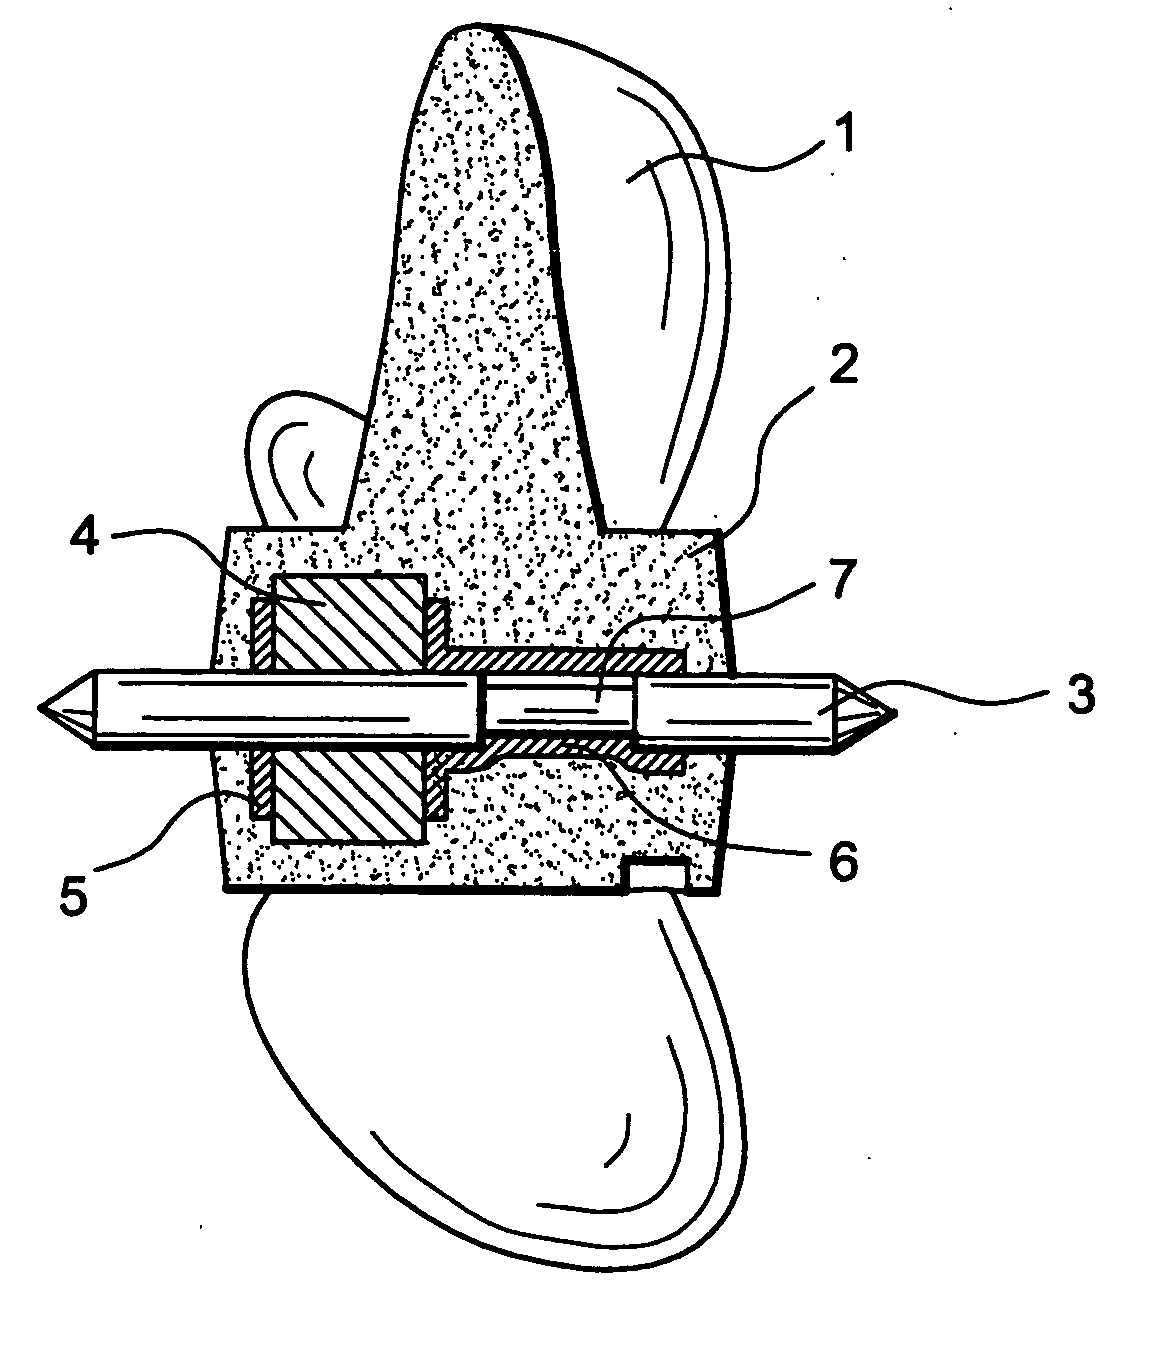 Impeller for data acquisition in a flow